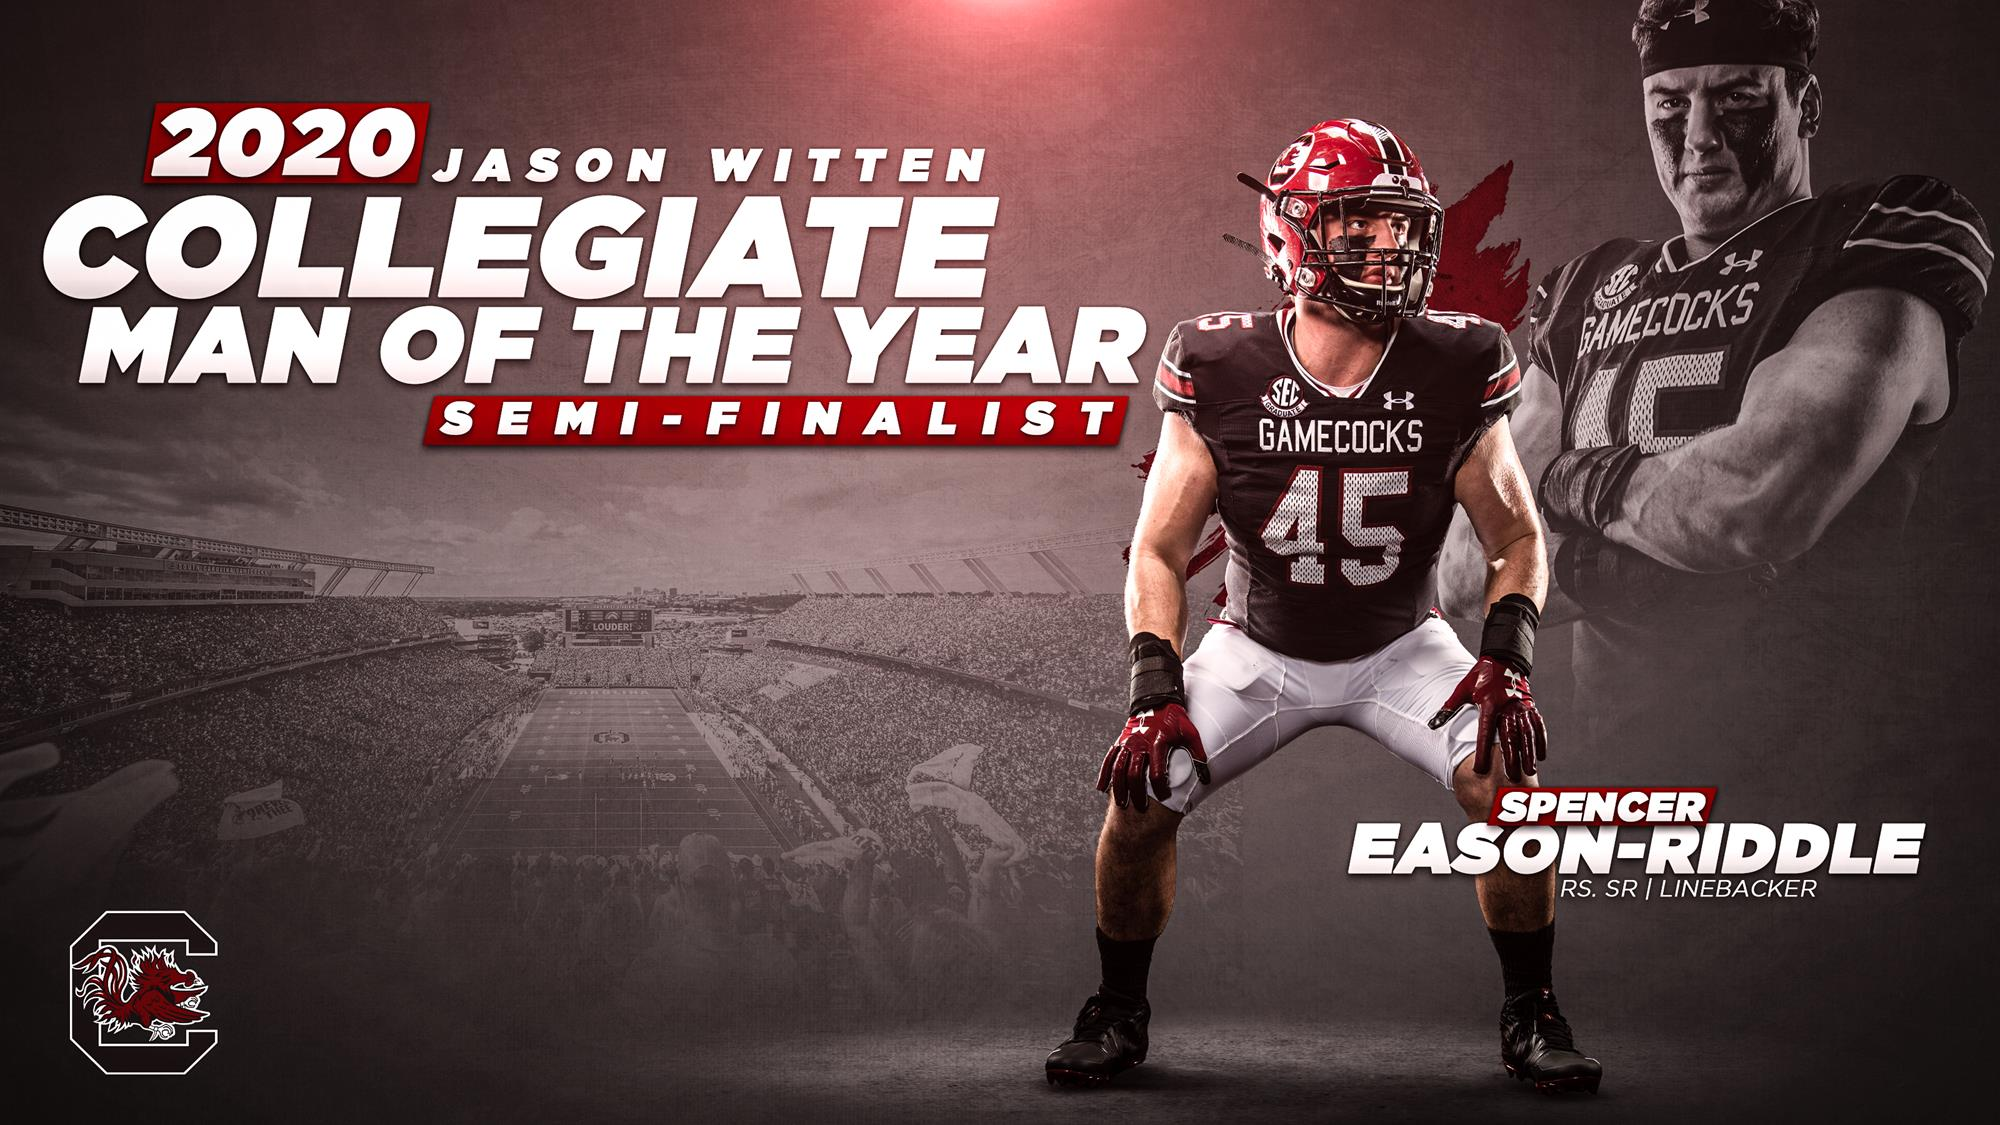 Eason-Riddle Named Semifinalist for the Jason Witten Collegiate Man of the Year Award